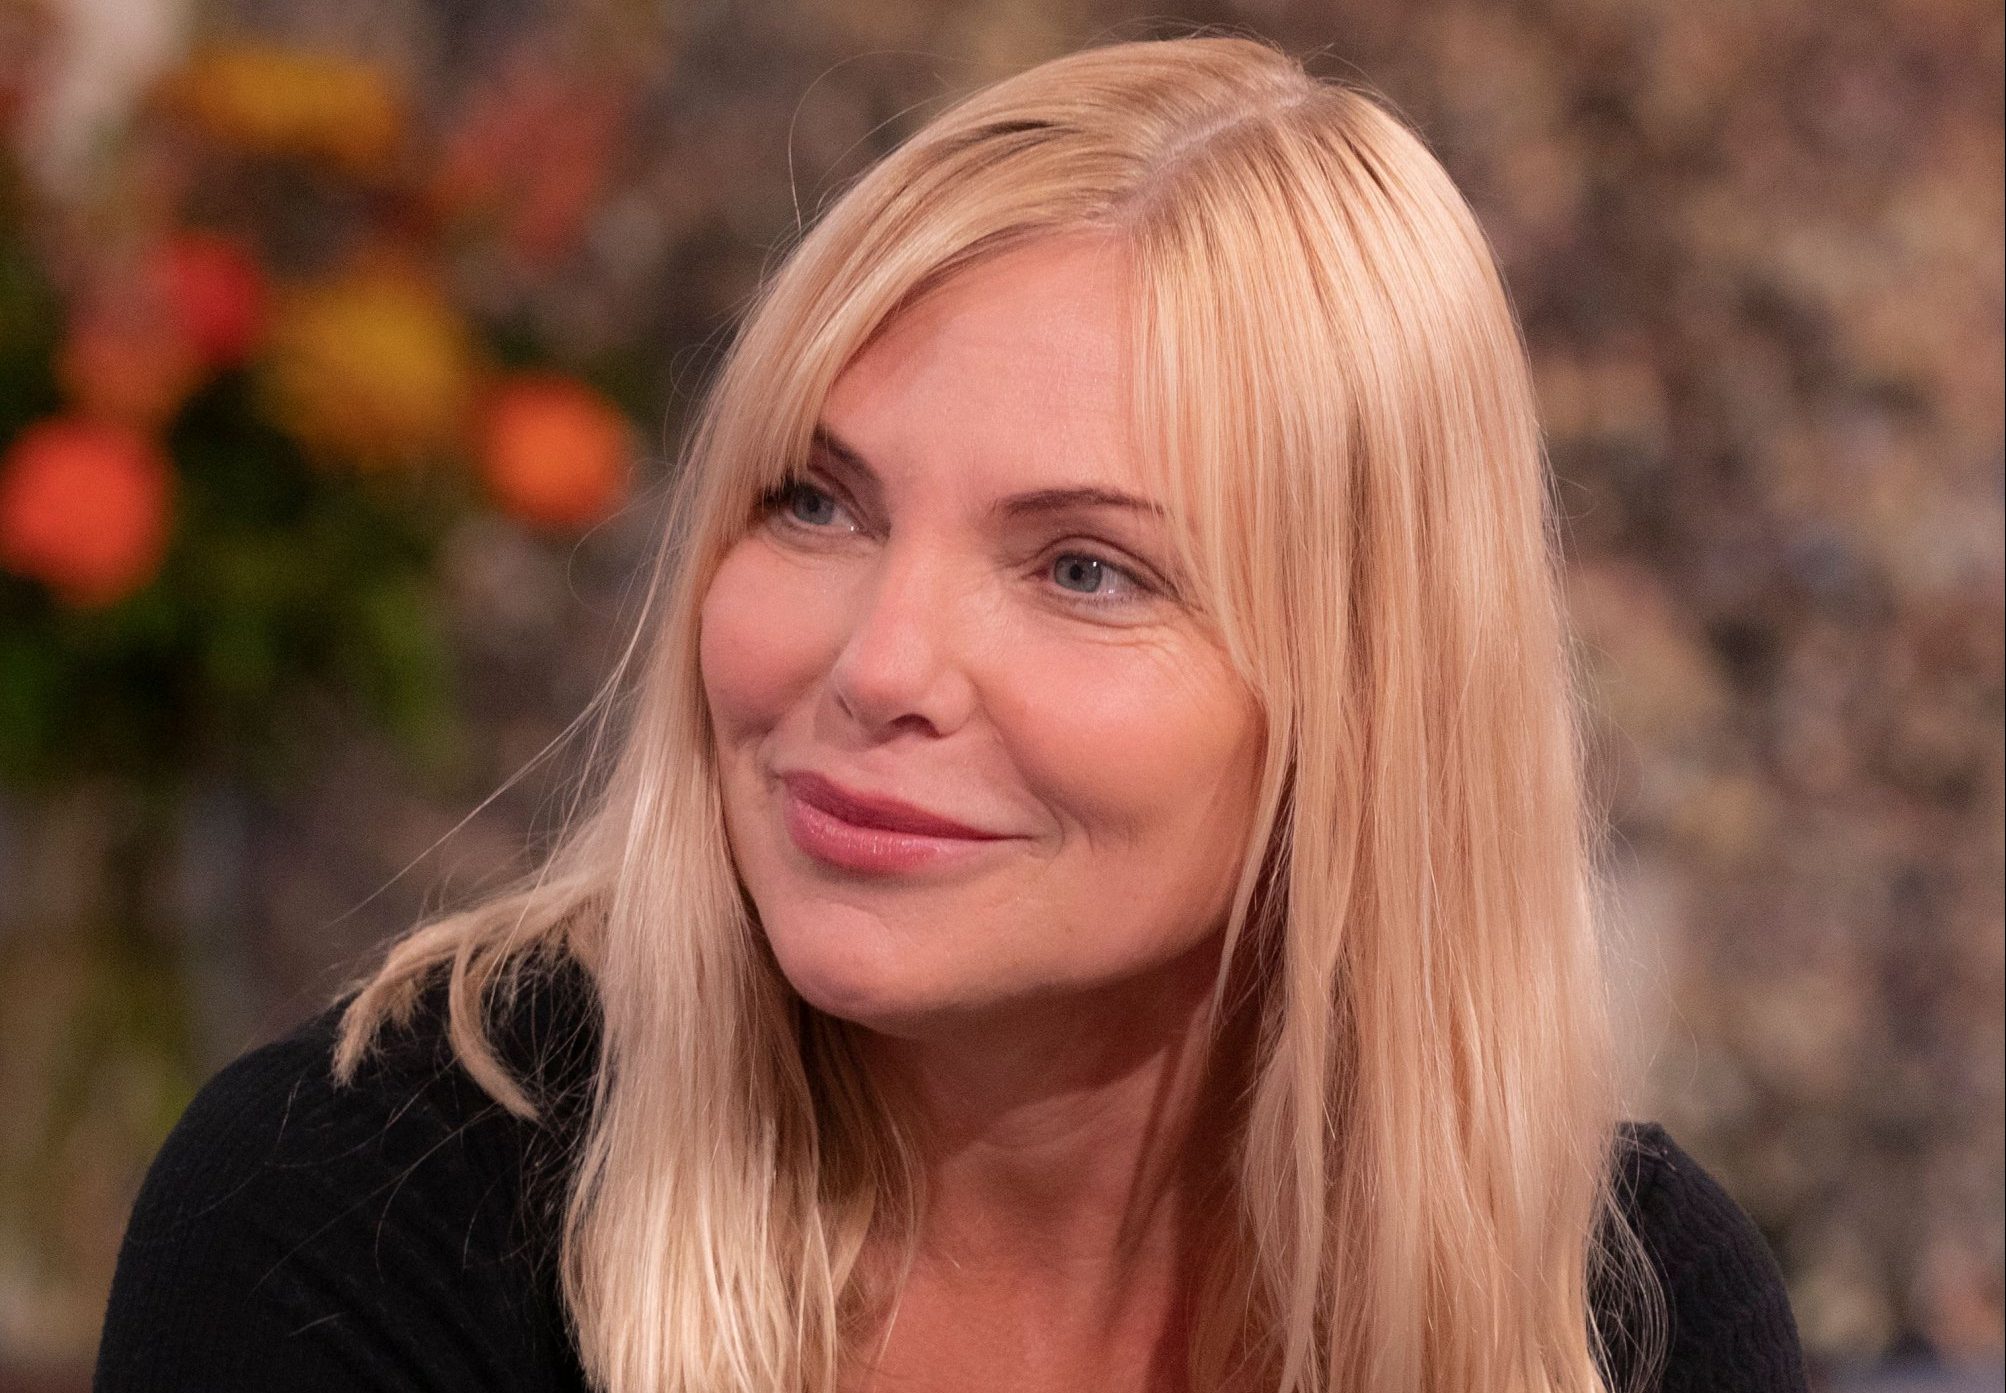 EastEnders star Samantha Womack reveals she is cancer free